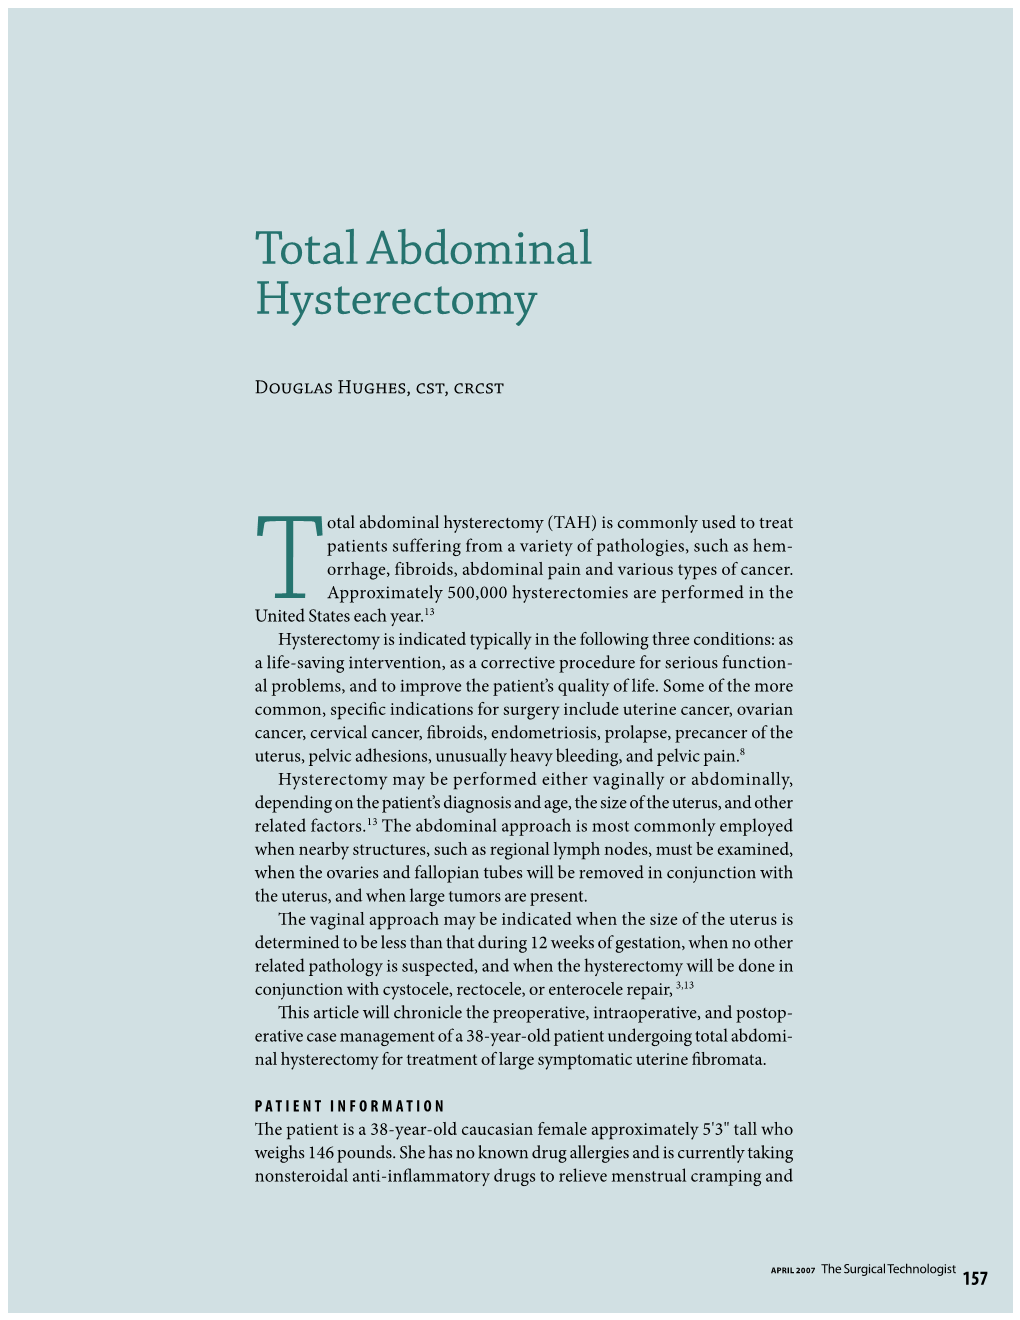 Total Abdominal Hysterectomy (TAH) Is Commonly Used to Treat